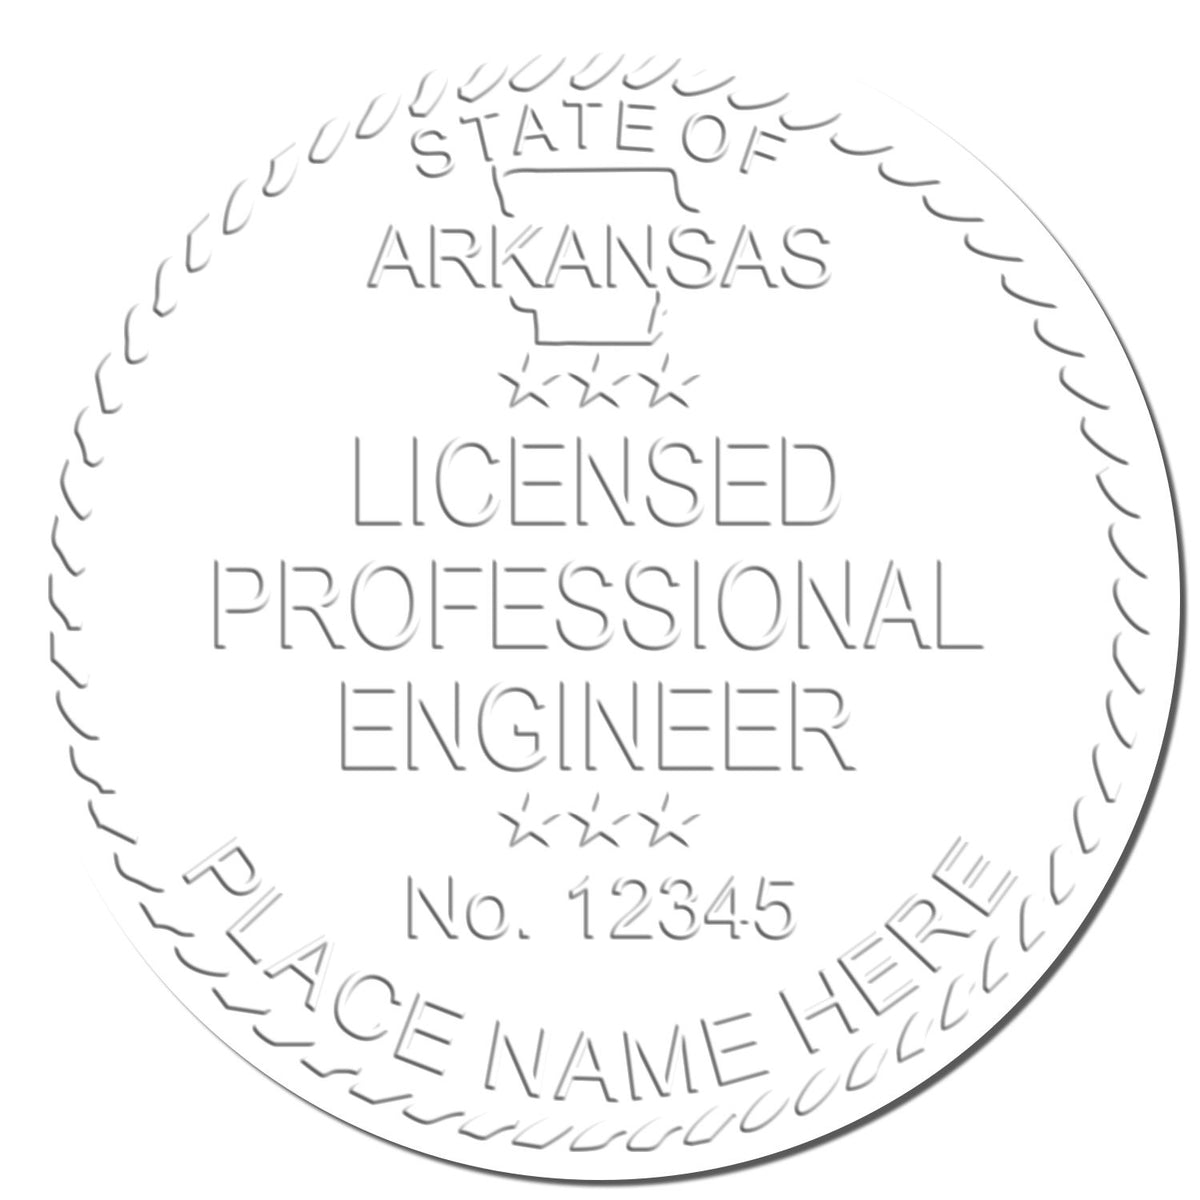 The Soft Arkansas Professional Engineer Seal stamp impression comes to life with a crisp, detailed photo on paper - showcasing true professional quality.